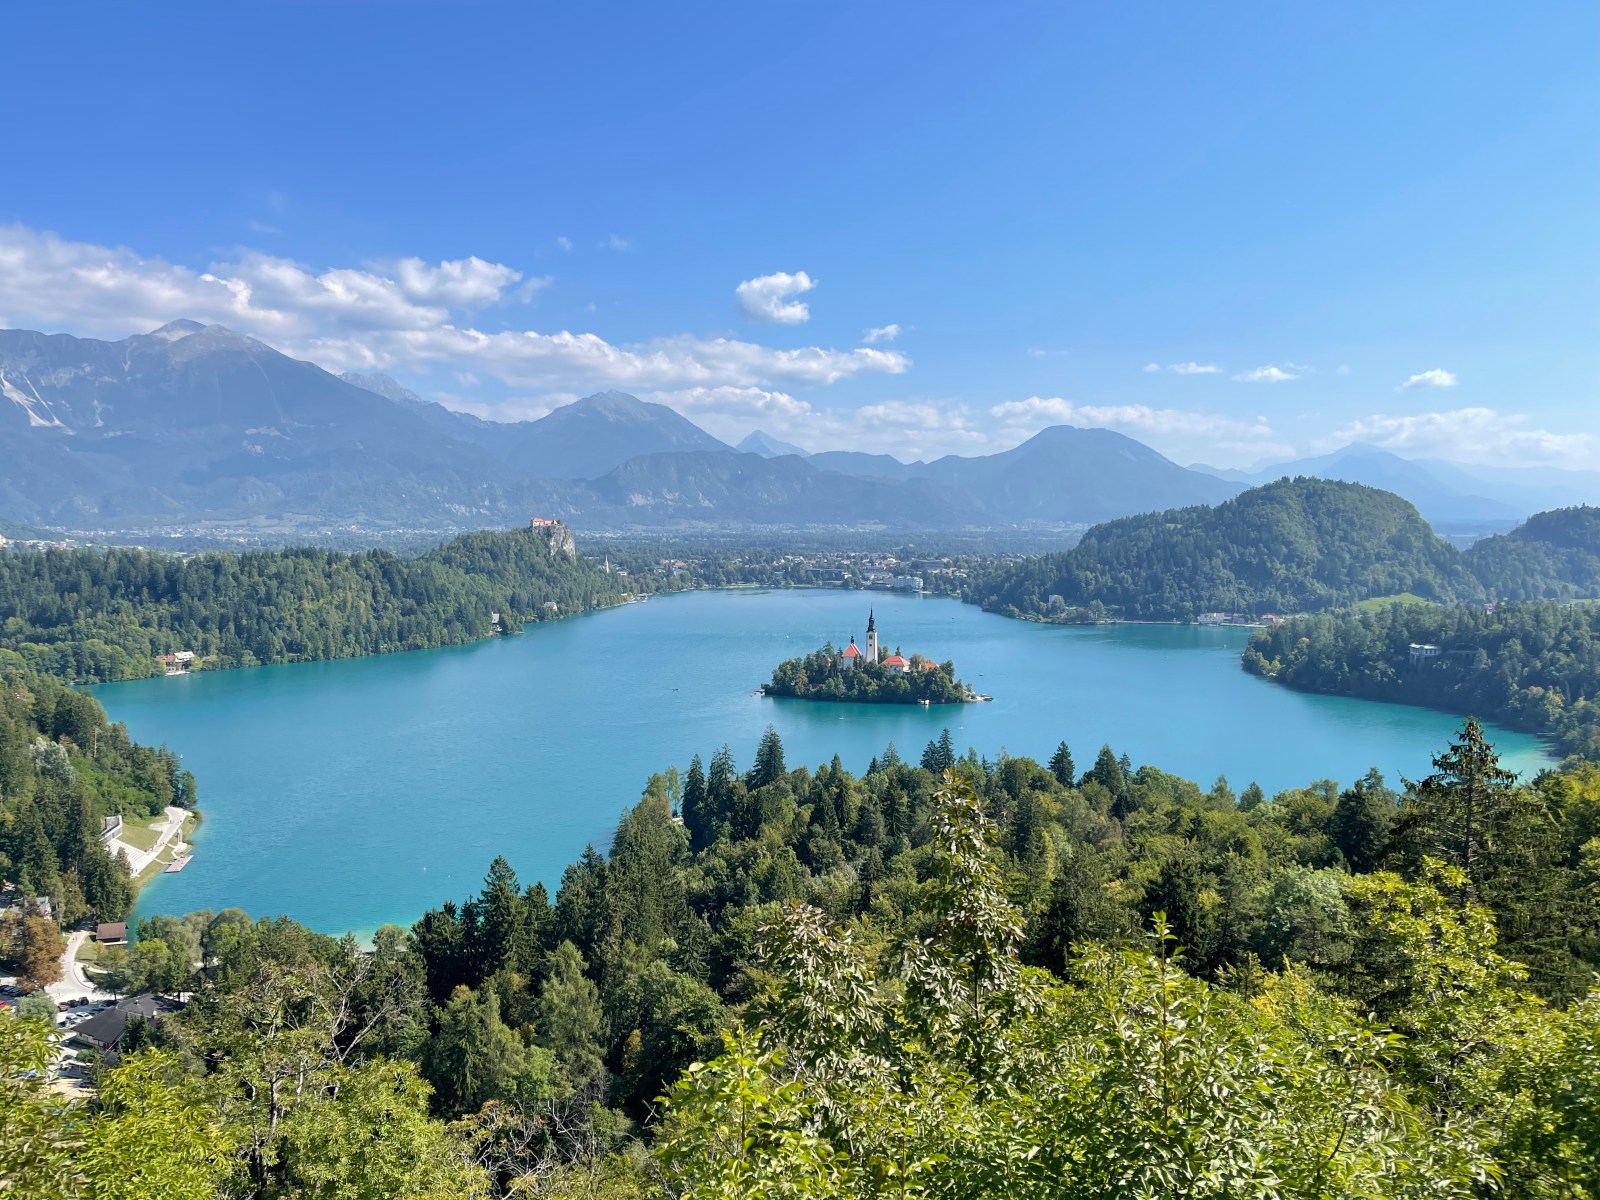 Fairytale views by Lake Bled